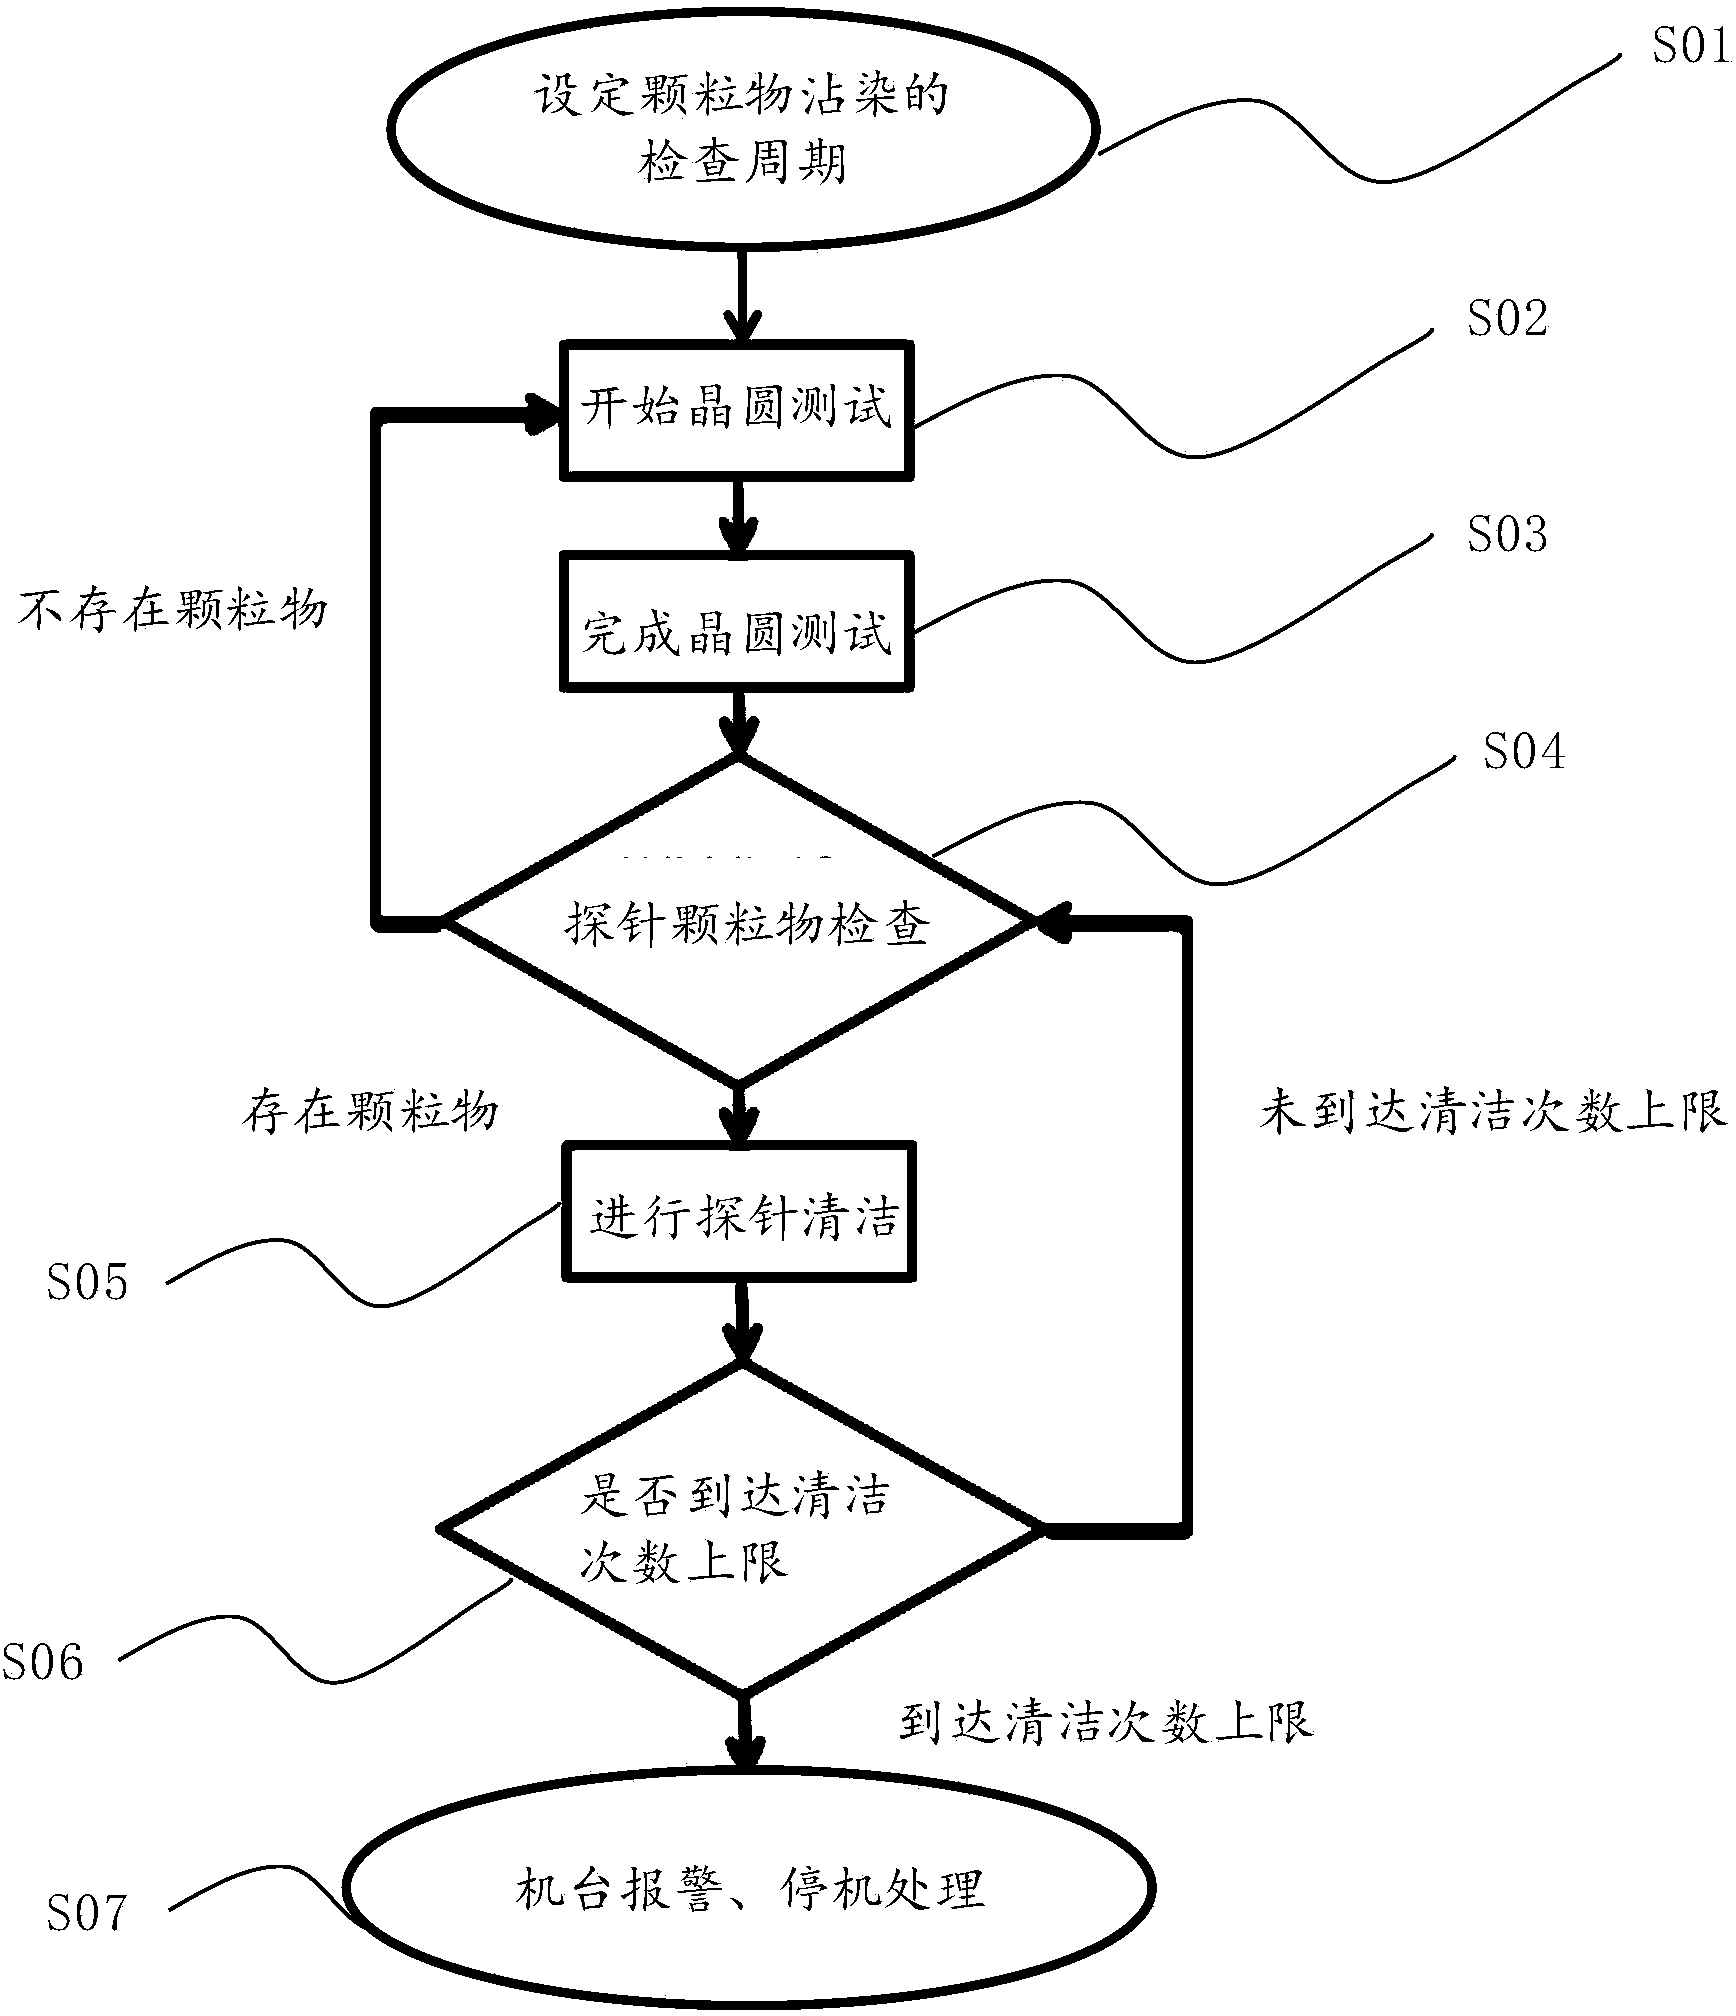 Cleaning control method of particulate matters on probes of probe card